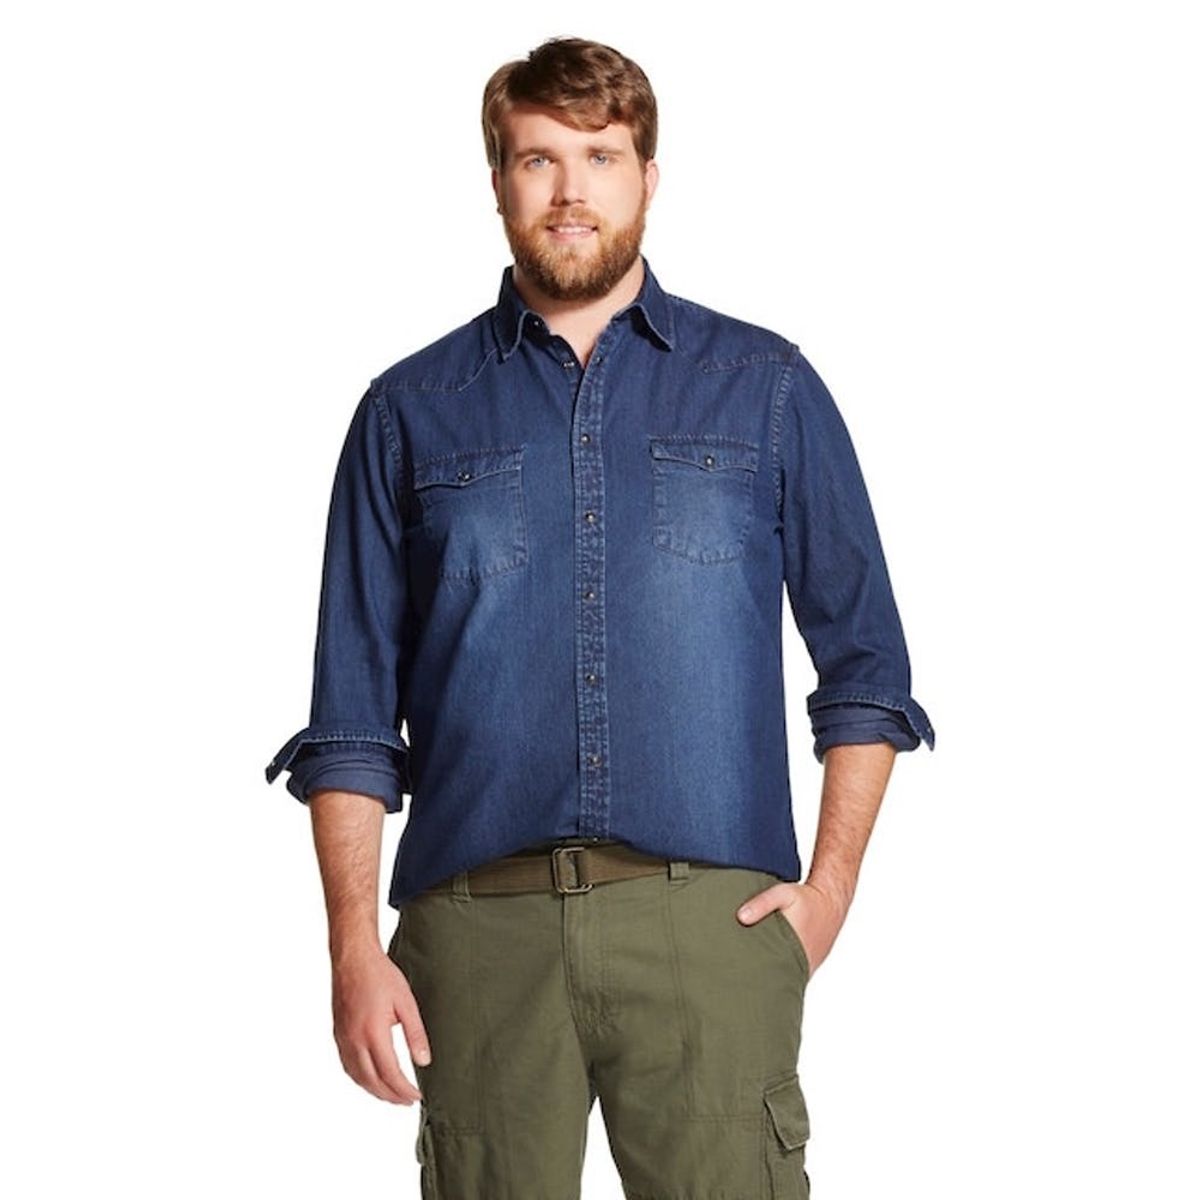 Target’s Only Plus-Size Male Model Makes an Important Statement About Inclusivity